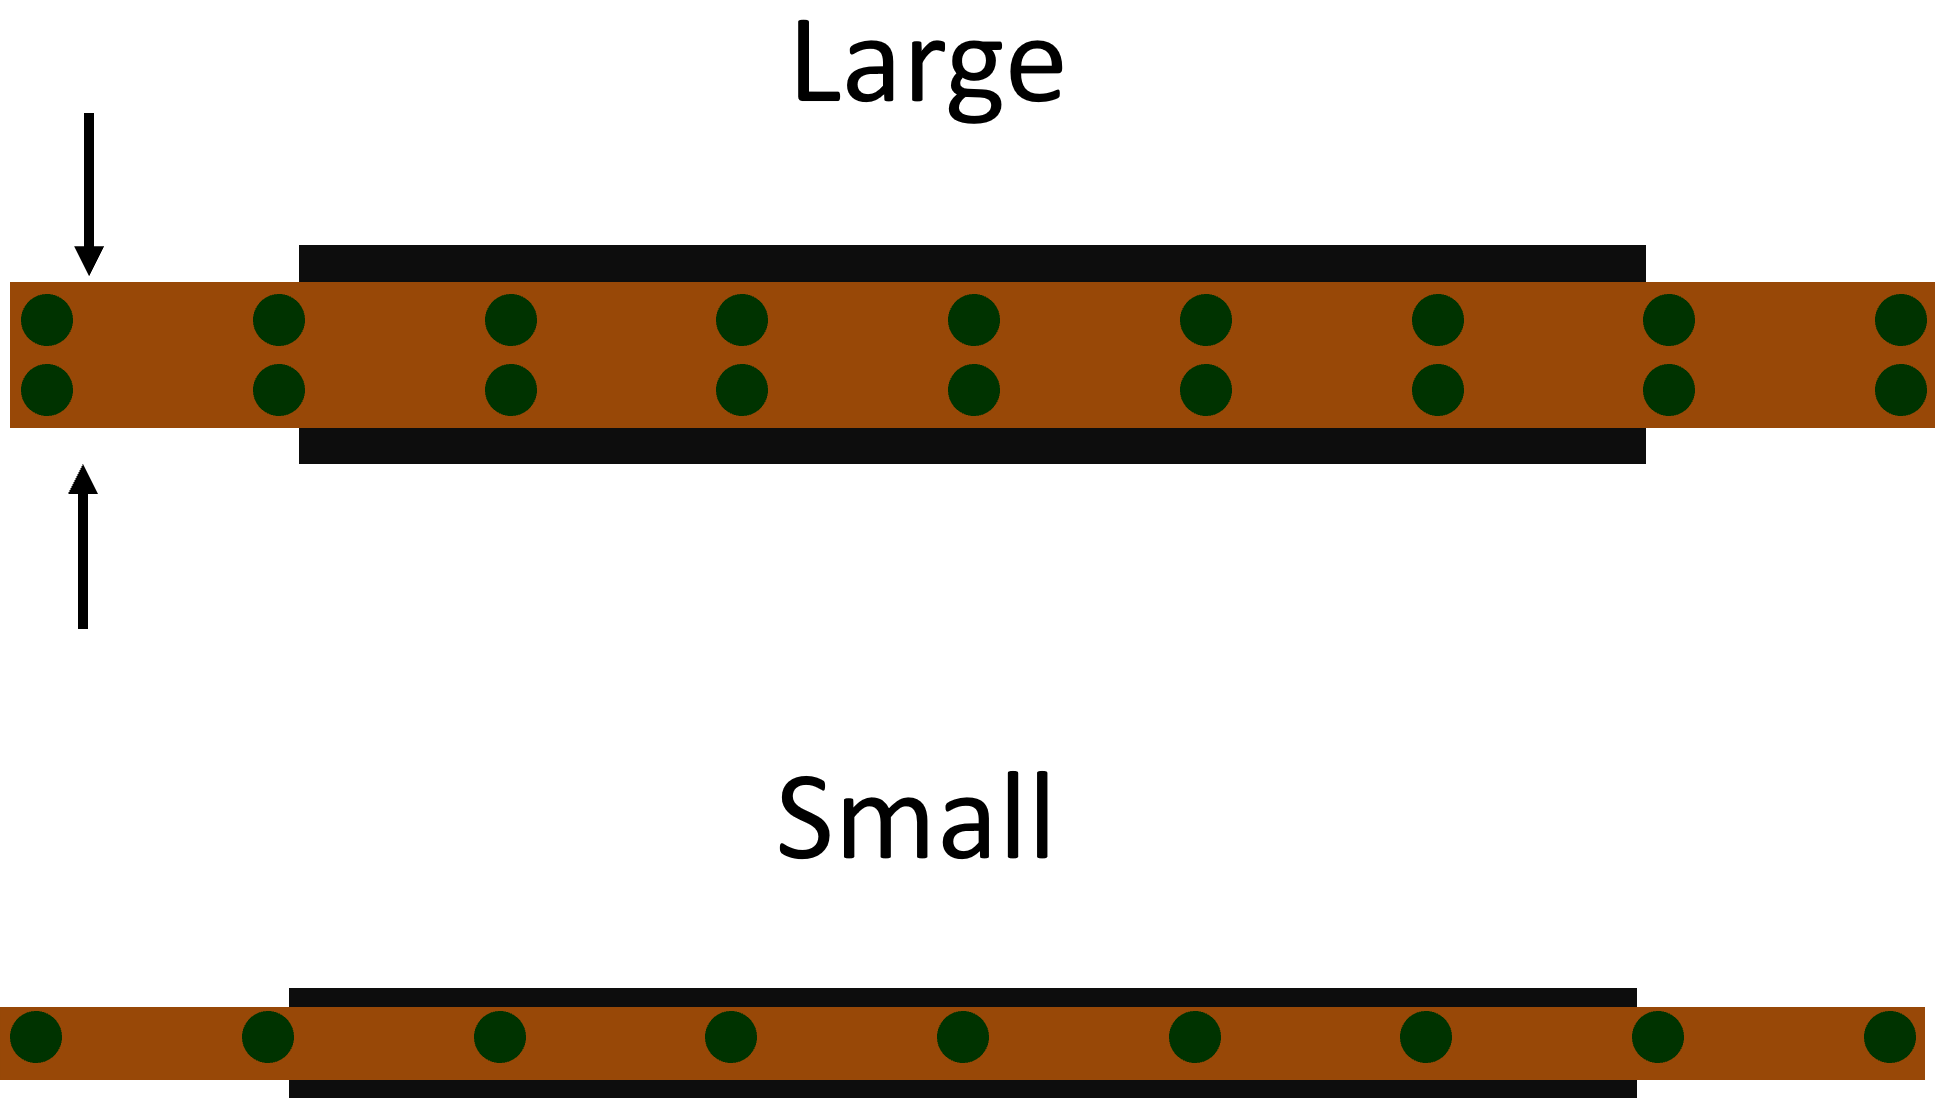 cross sectional area of a conductor